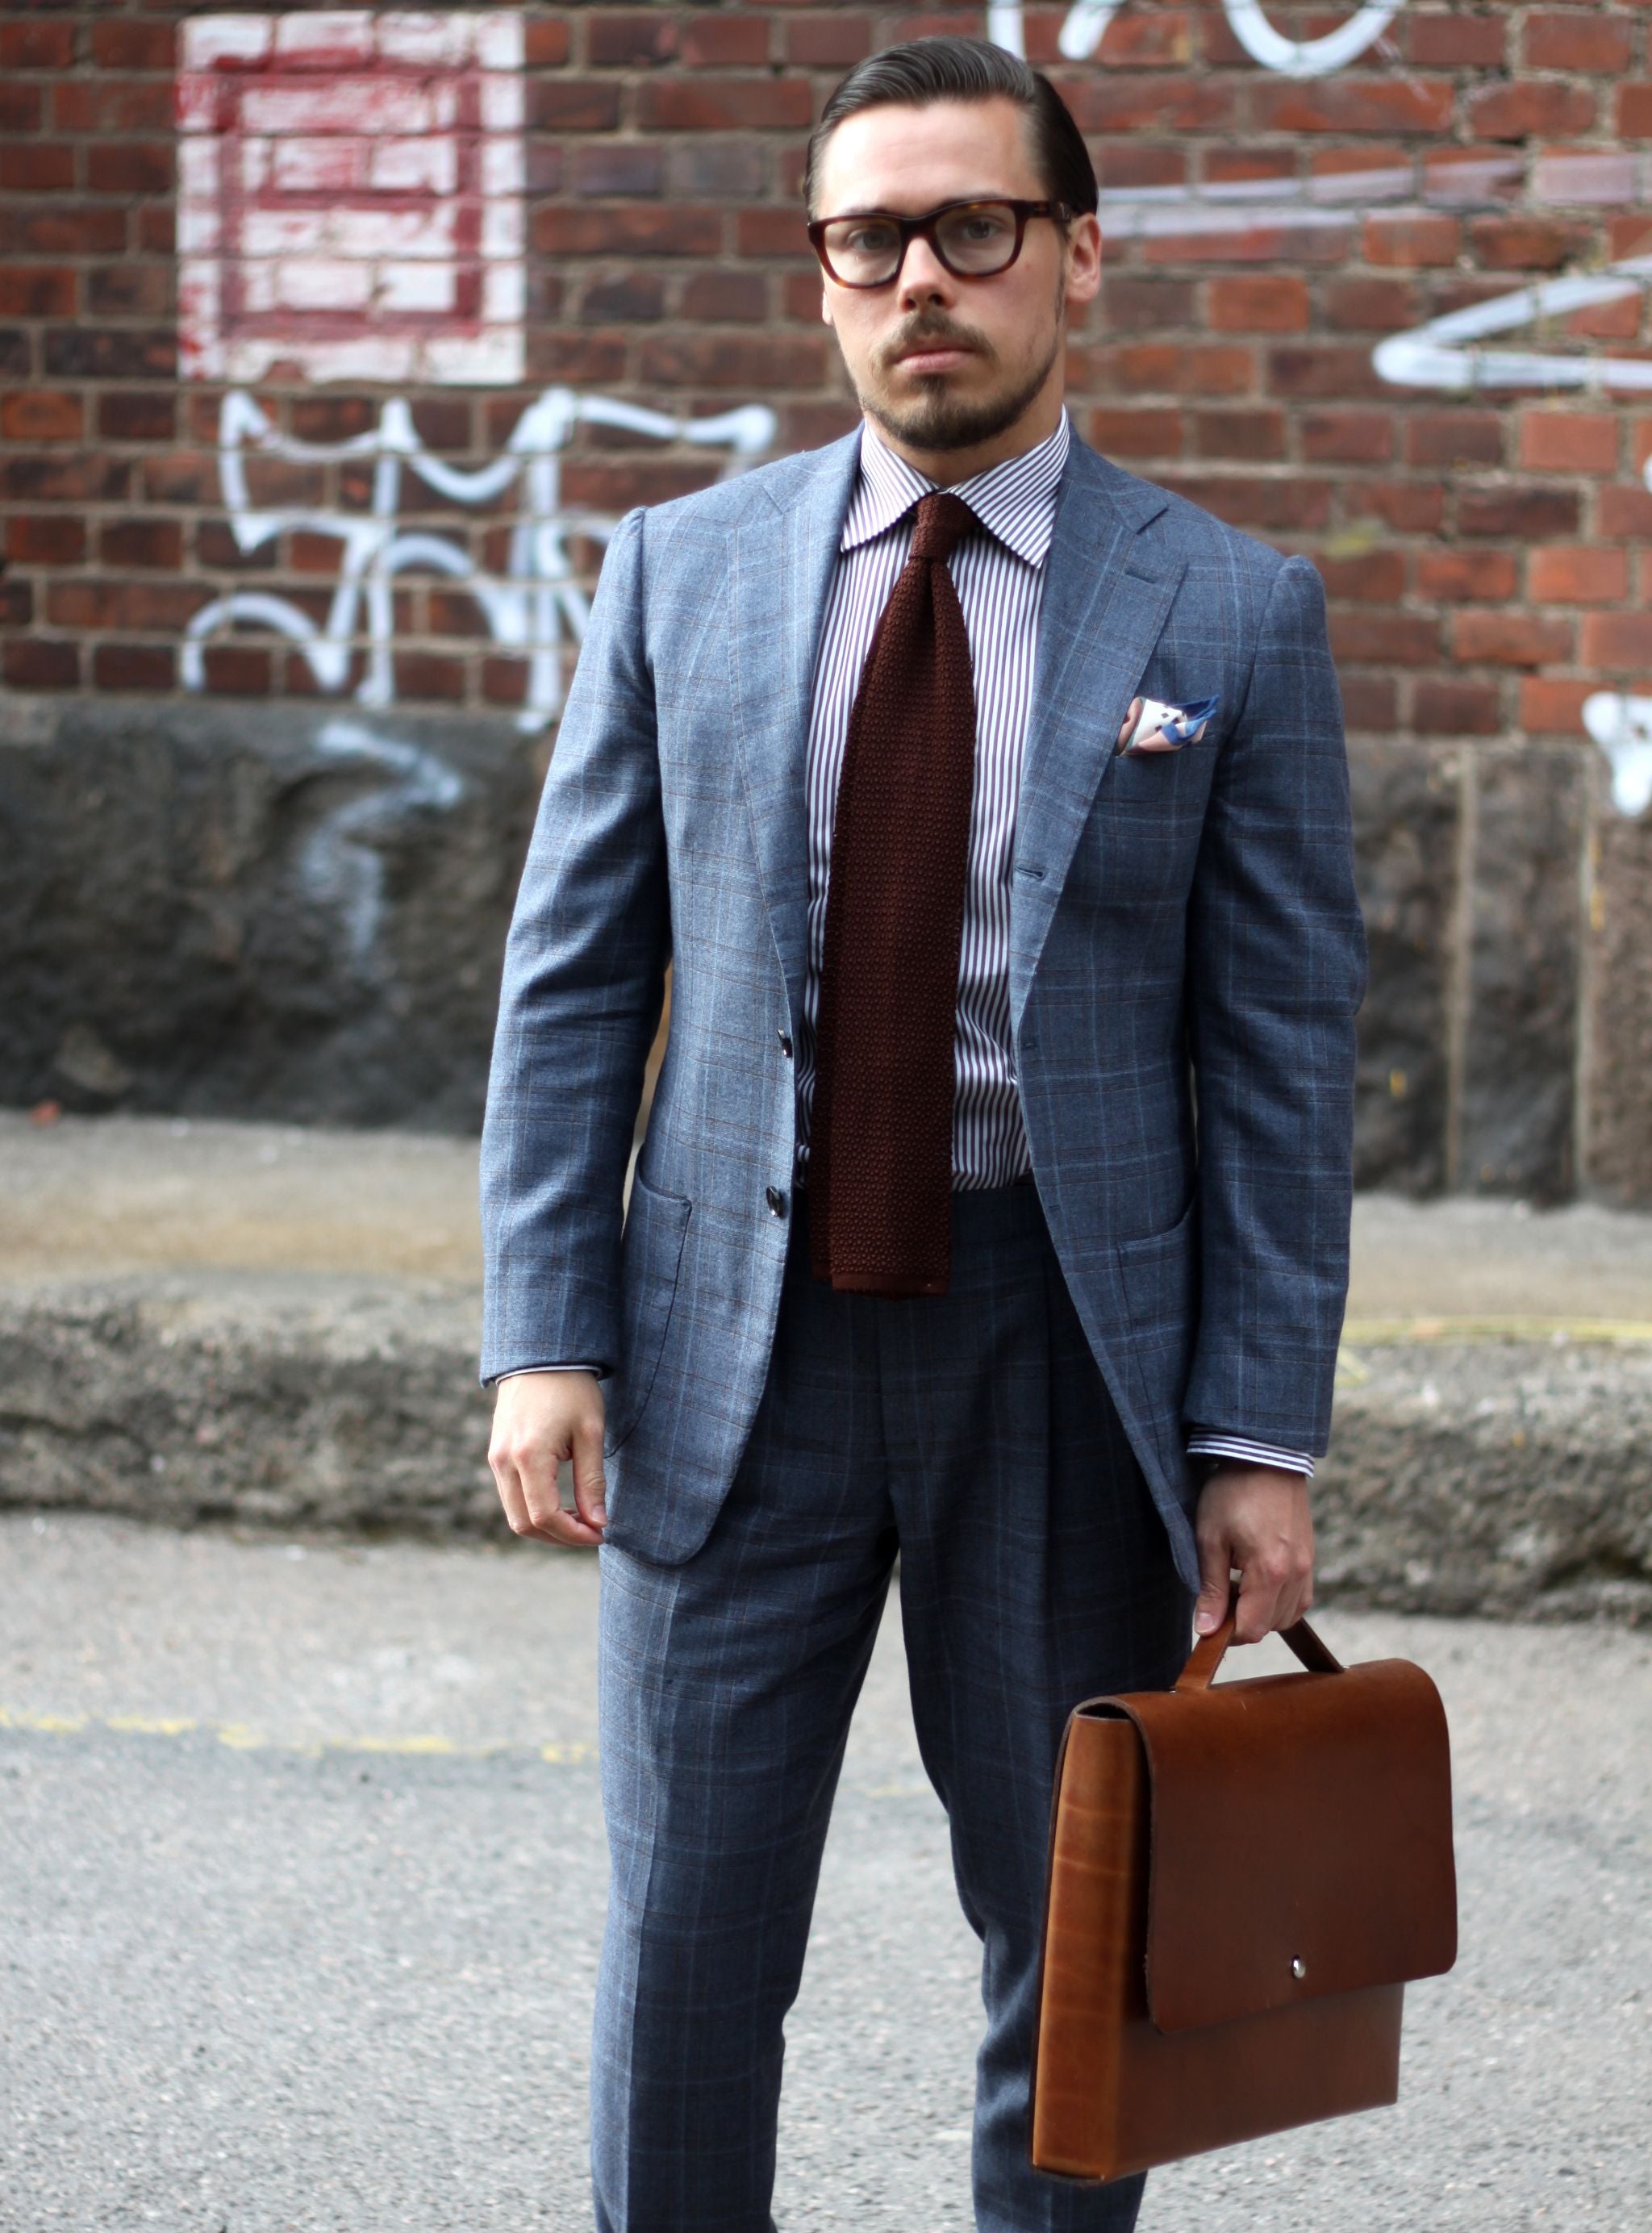 Brown knit tie with suit and striped shirt